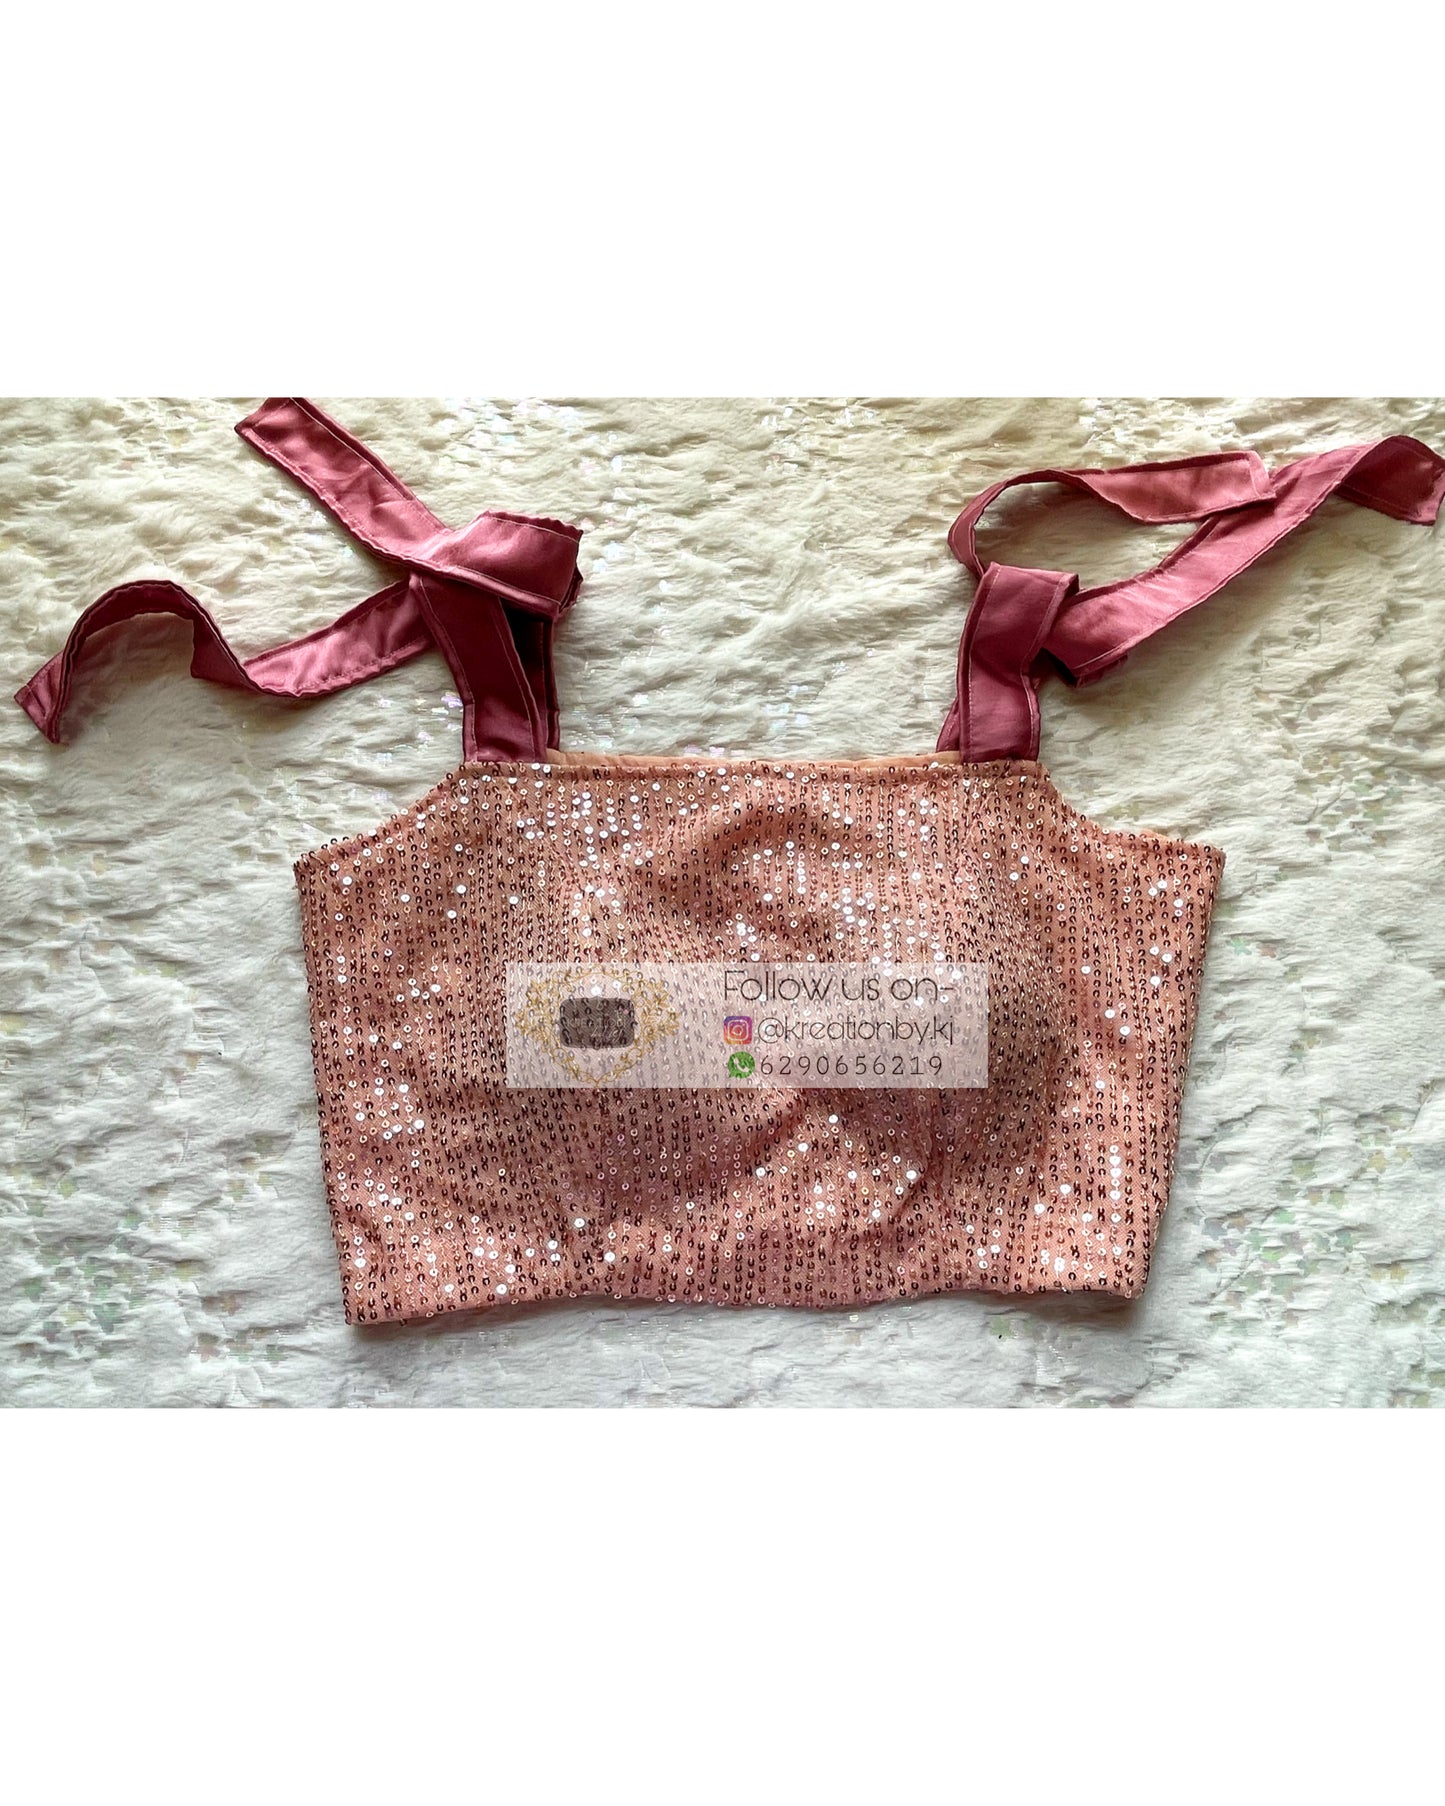 Alicia Champagne Pink Sequins Crop Top - kreationbykj